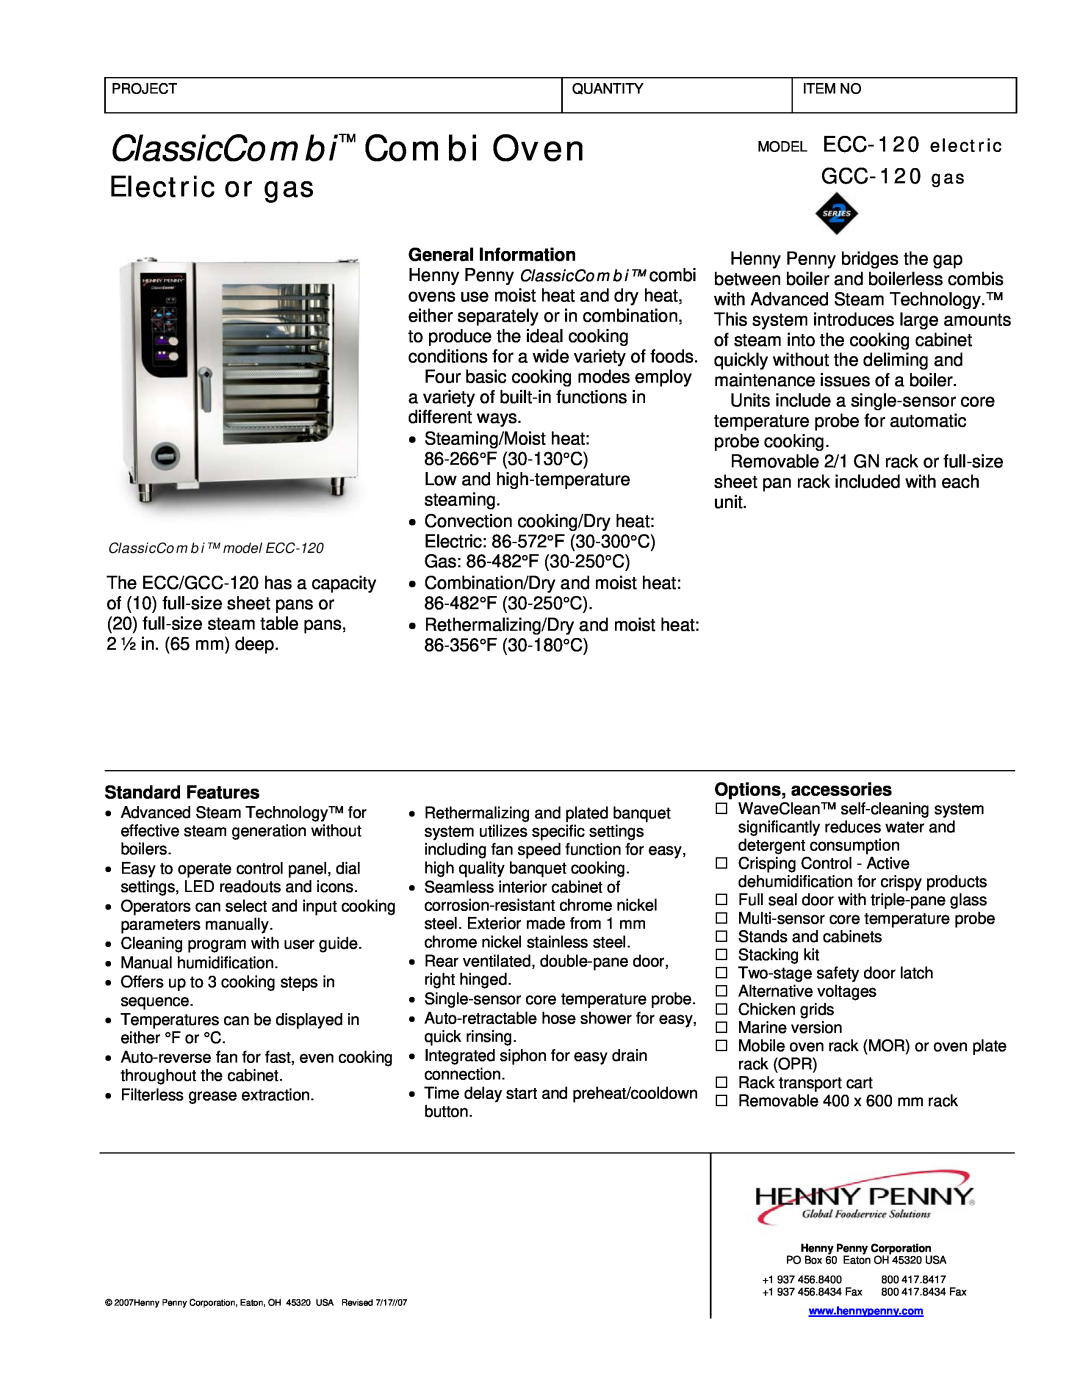 Henny Penny manual MODEL ECC-120 electric, GCC-120 gas, ClassicCombi Combi Oven, Electric or gas, General Information 